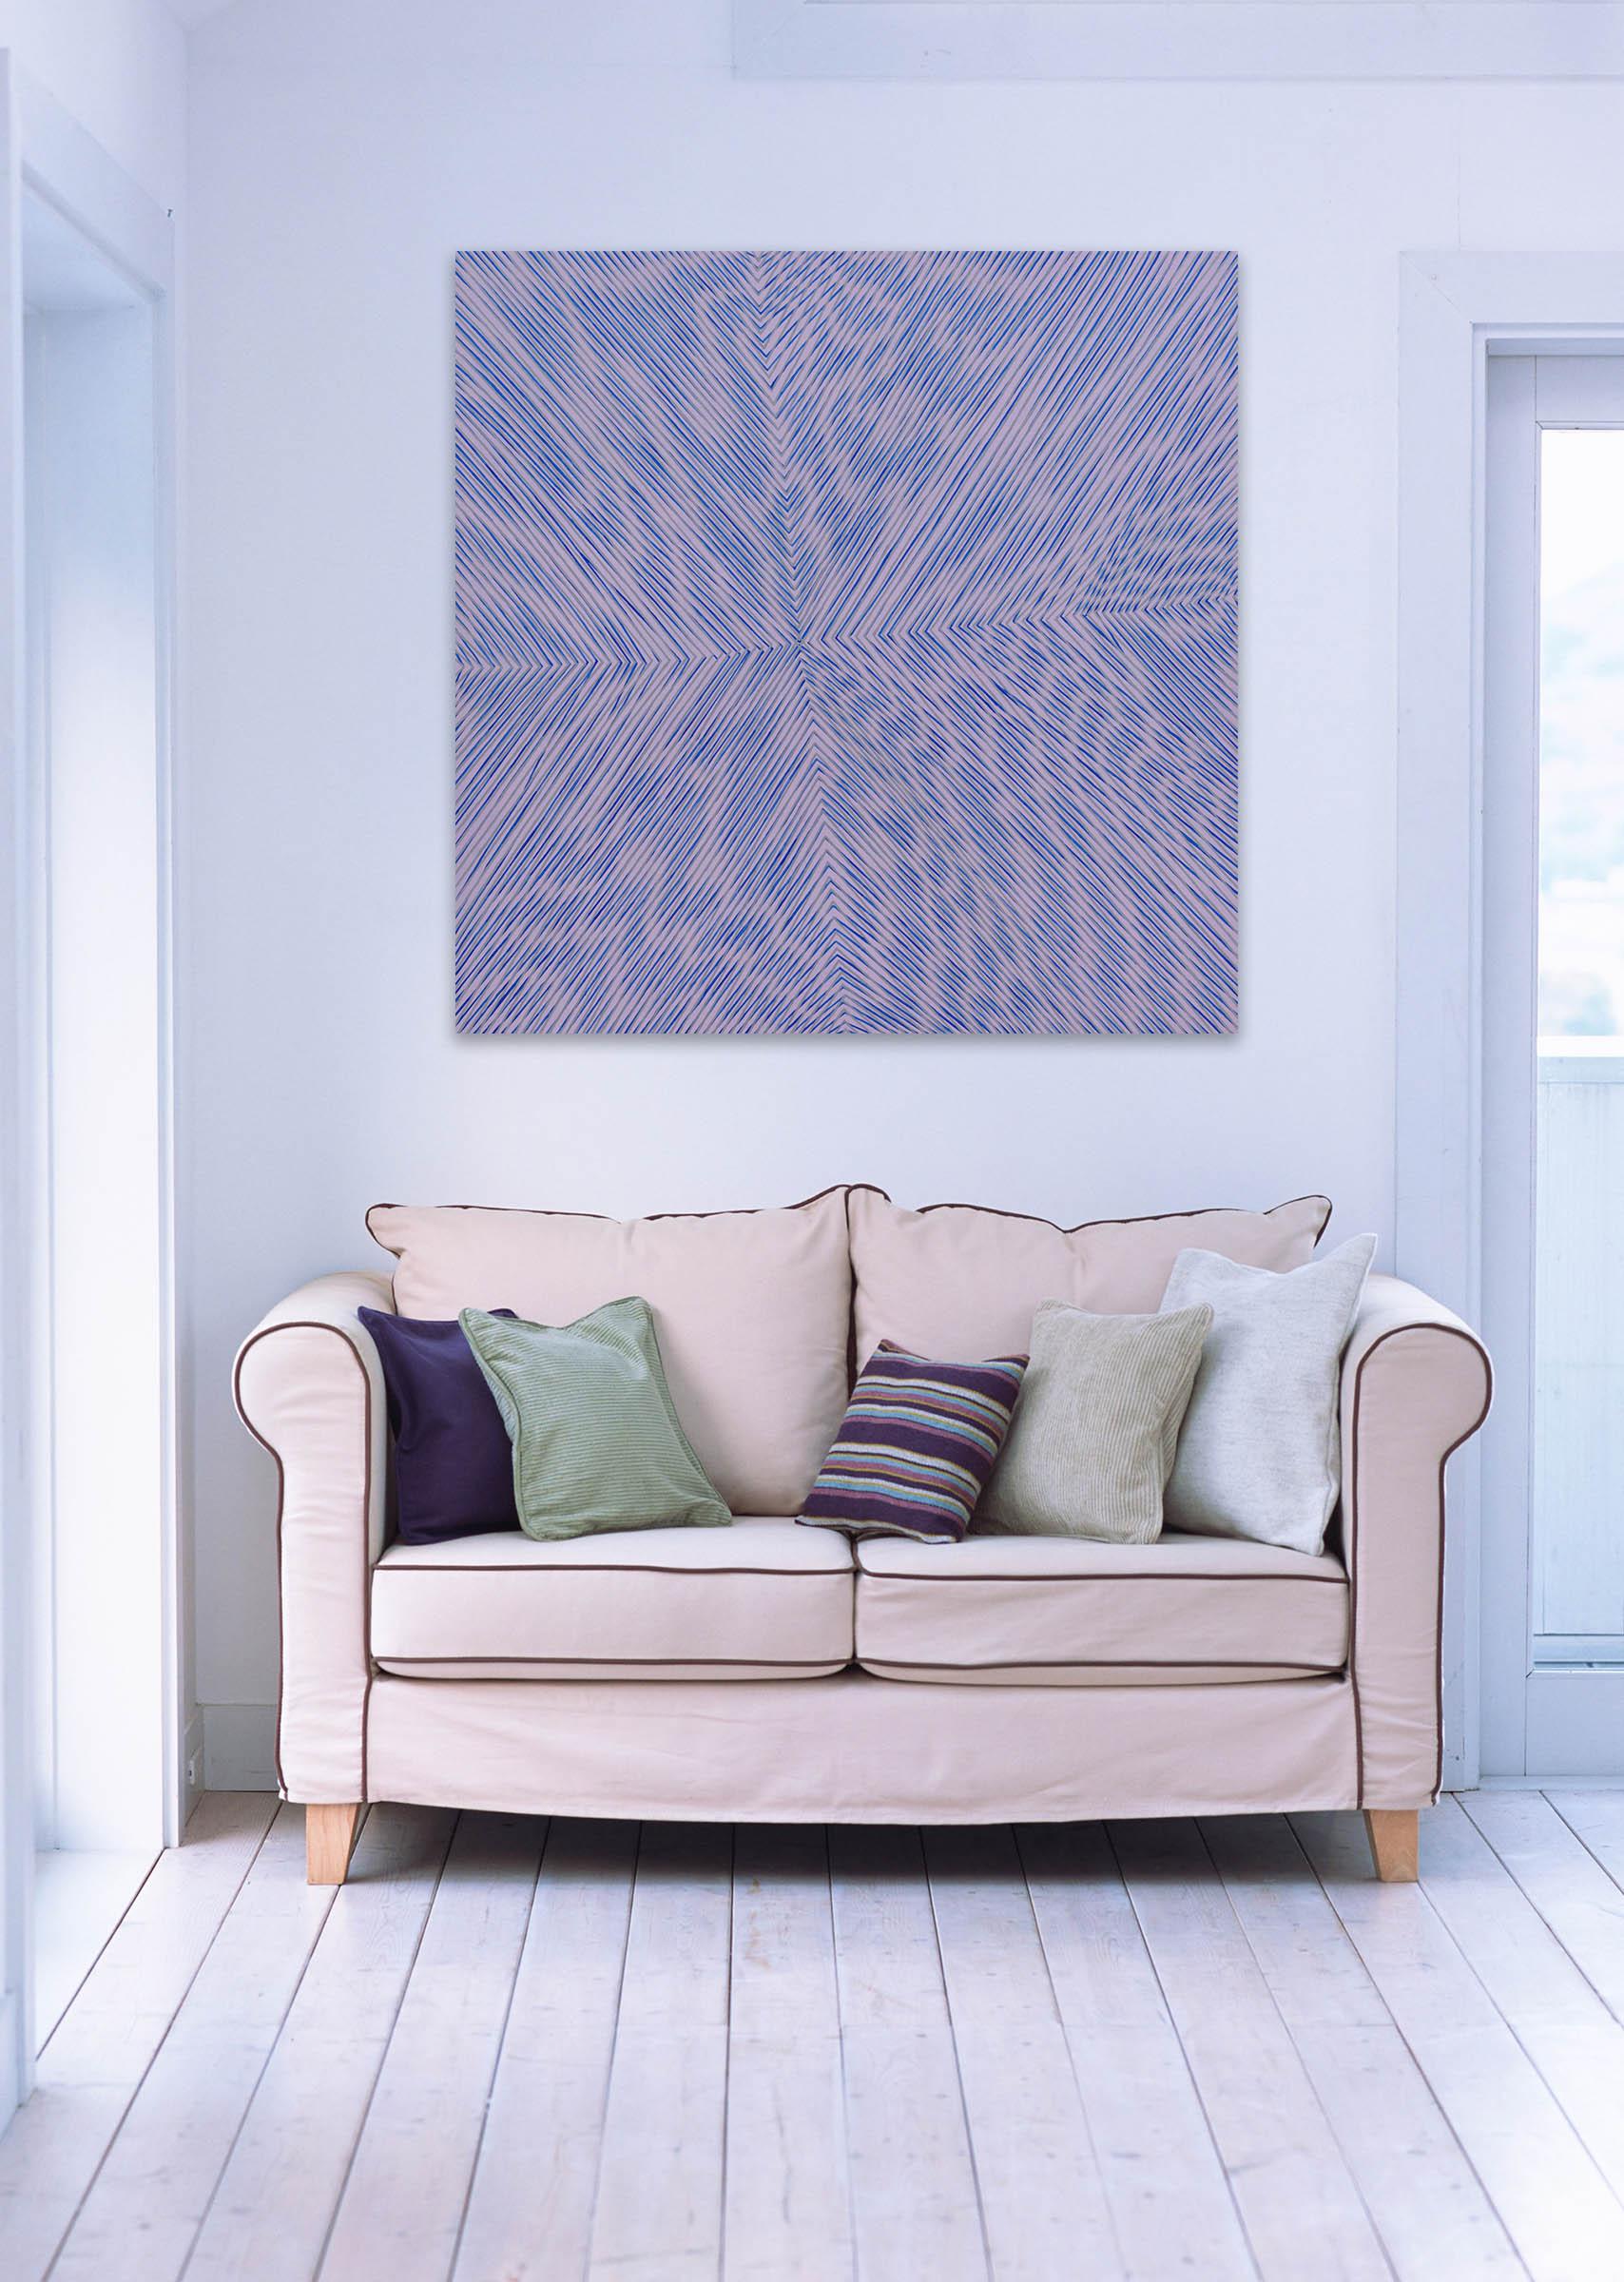 Heavy Ocean Cloud (Abstract painting) - Painting by Mel Prest